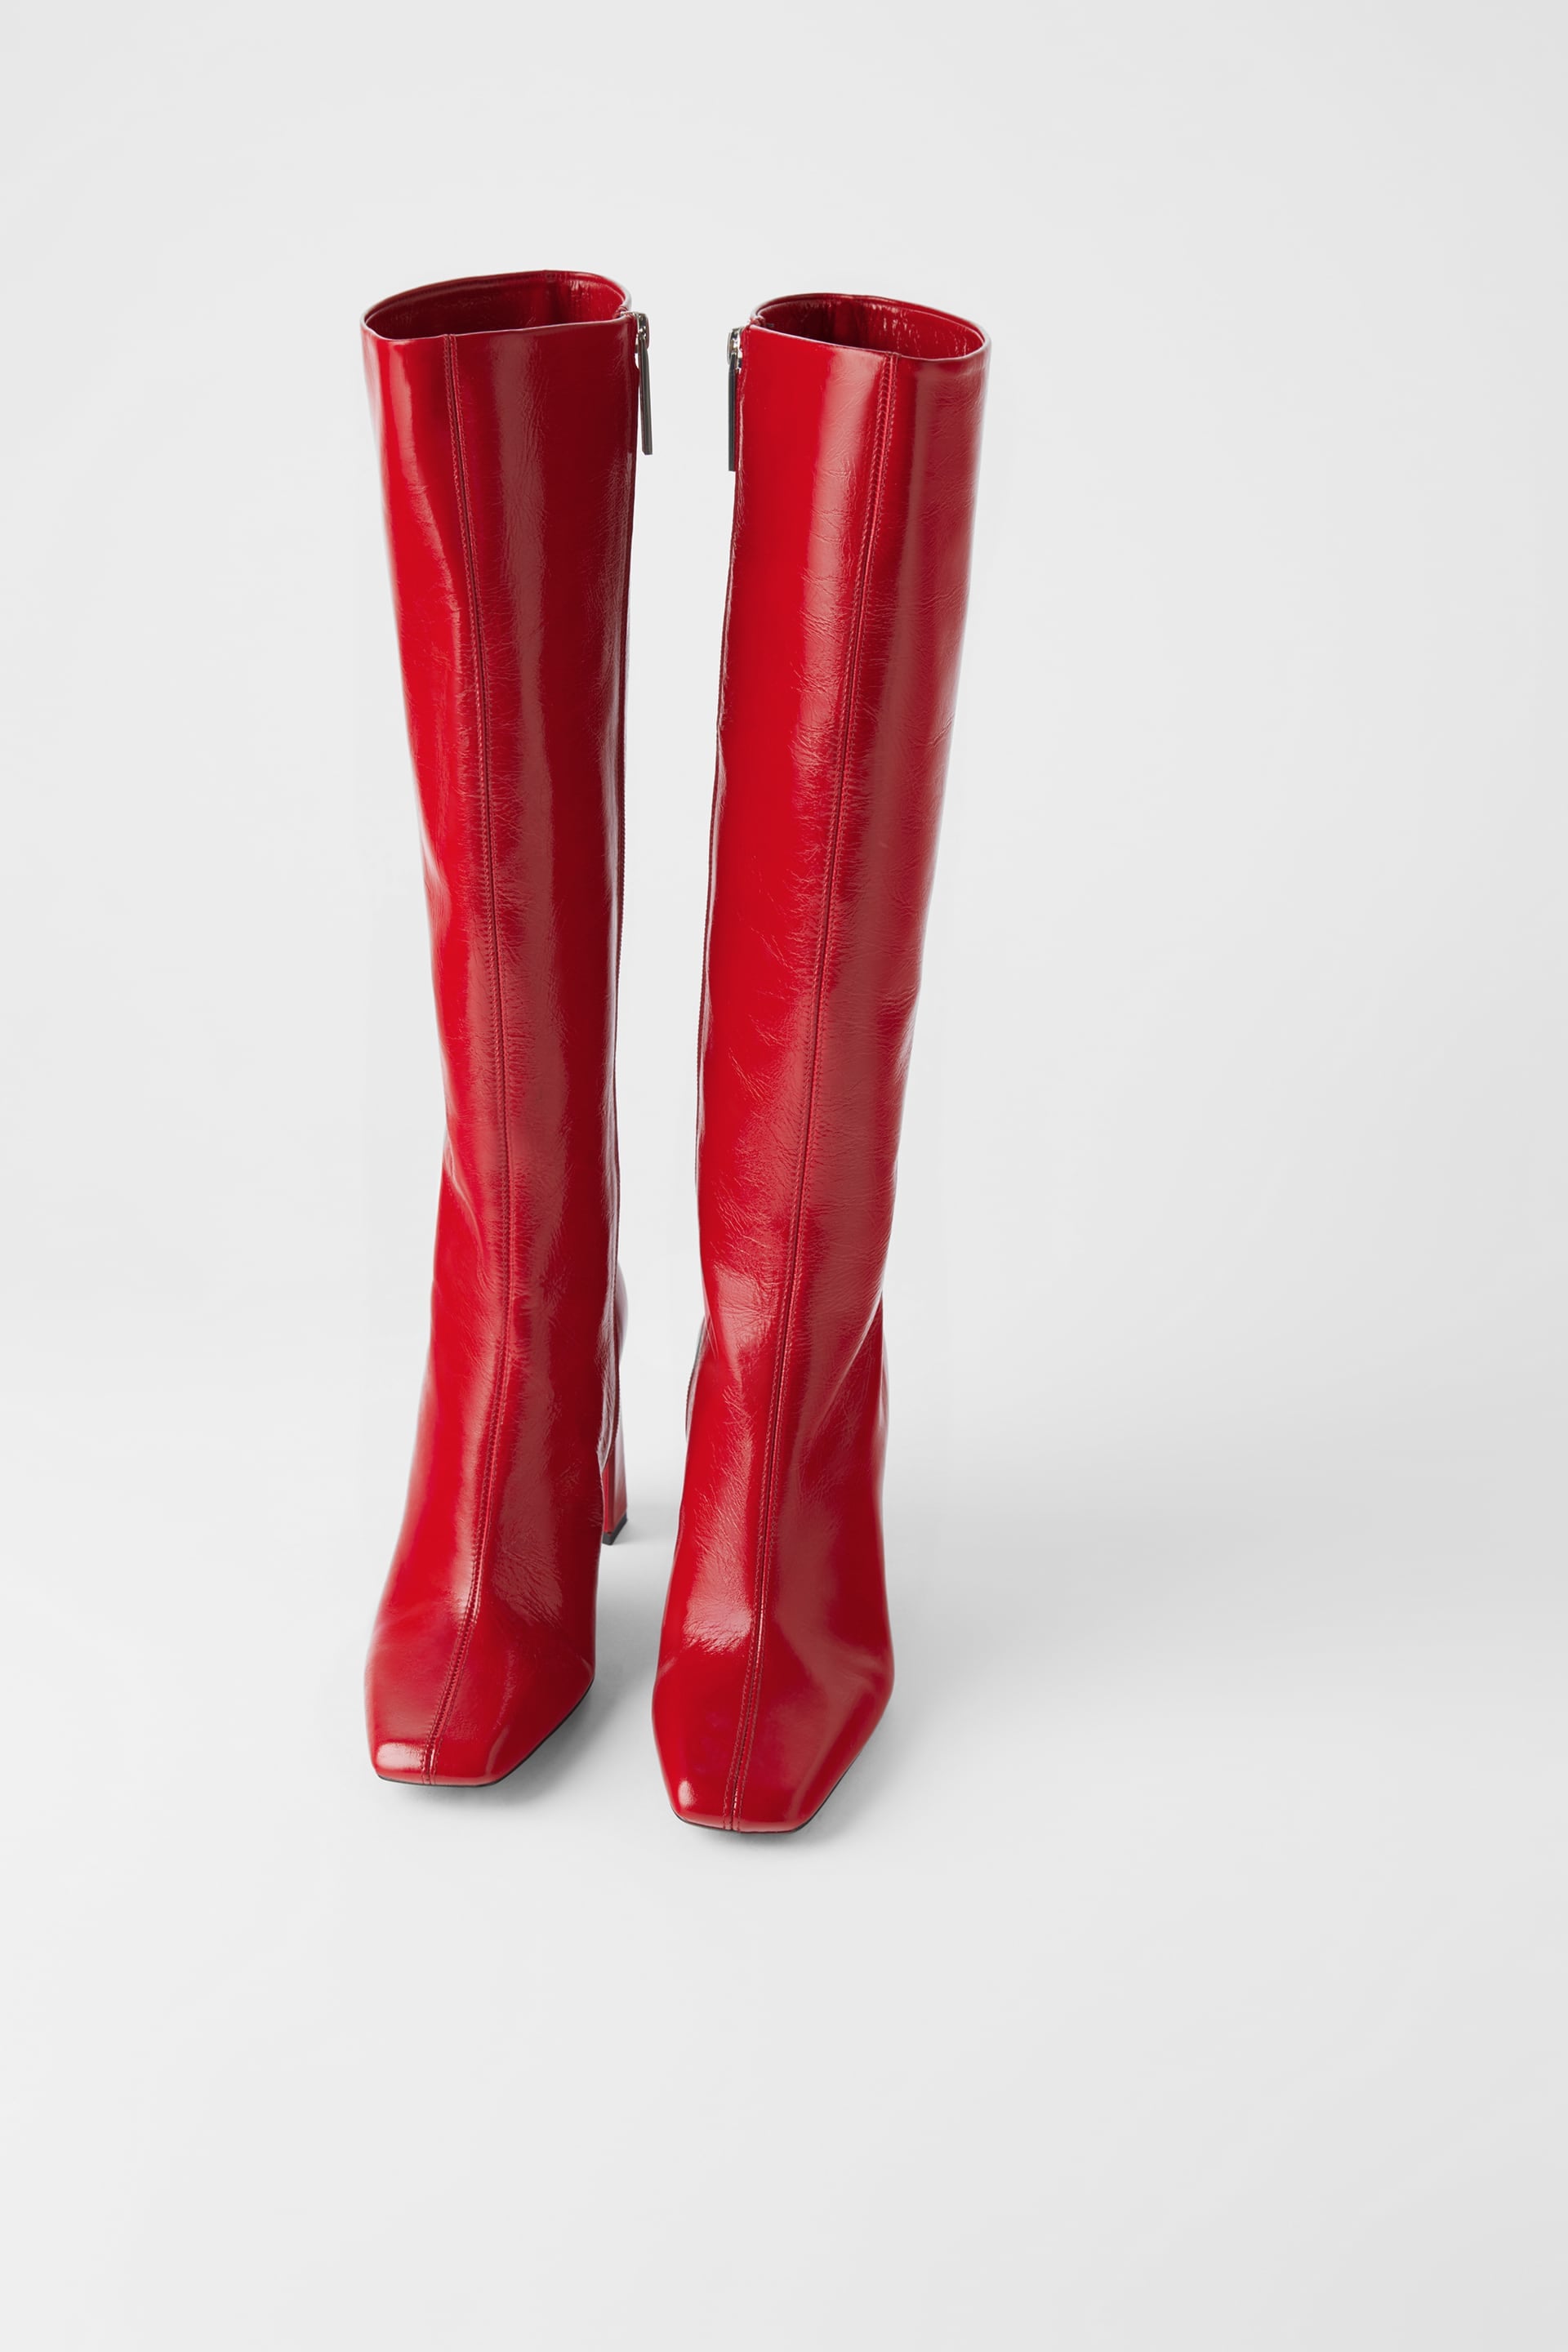 zara red patent boots